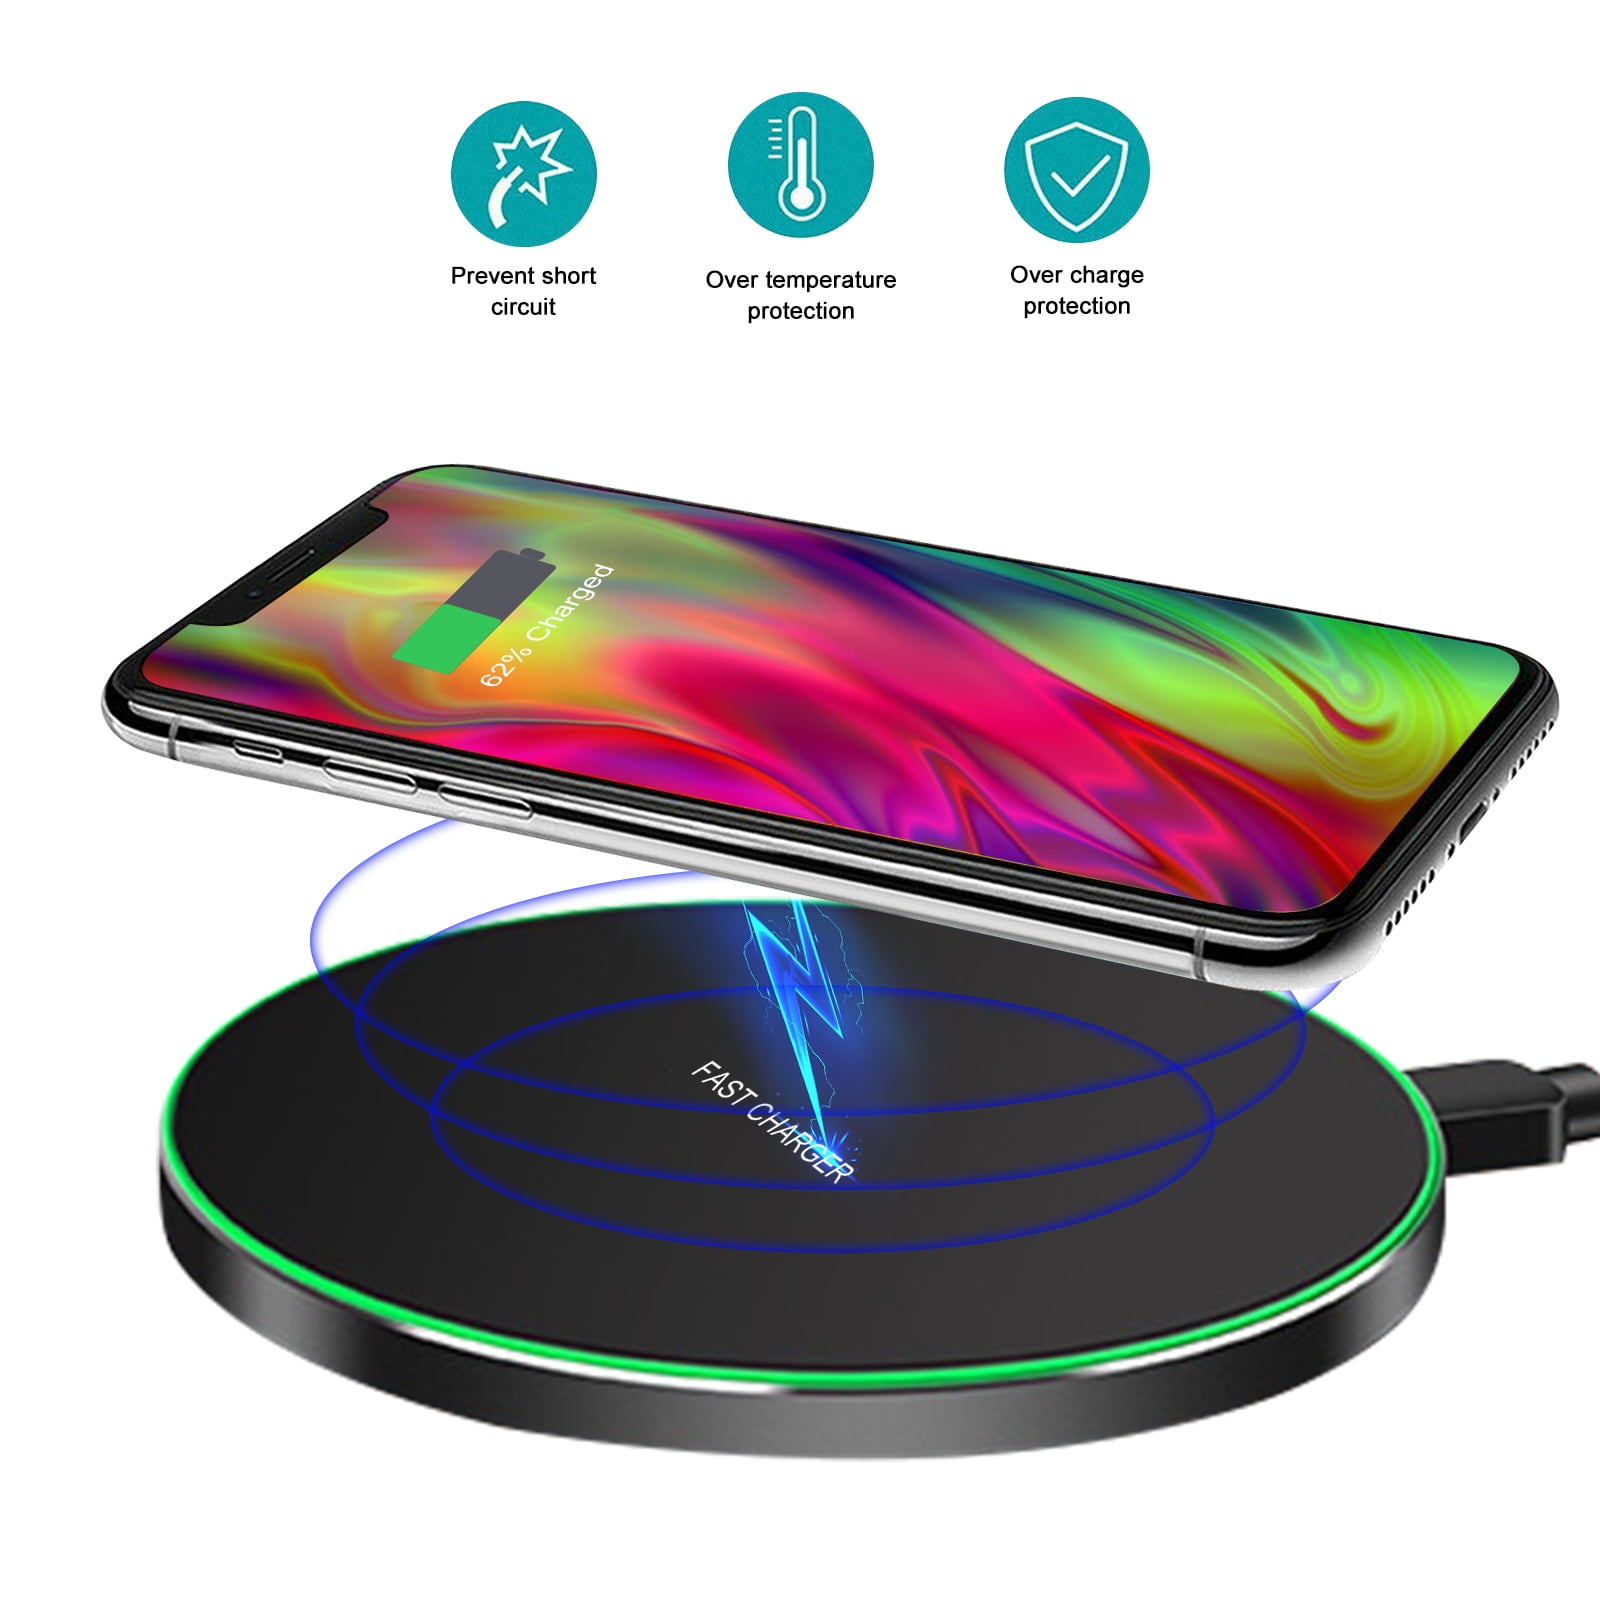 Black Samsung Galaxy Note 10+/Note 9/8/S7 S8 S9 S10+ S10e 10W Google Pixel 4 XL/3 XL HW P30 Pro/Mate 30/20 Pro Wireless Charger Stand 7.5W for Apple iPhone 11 Pro Max/Xs Max/XR/X/8 Plus